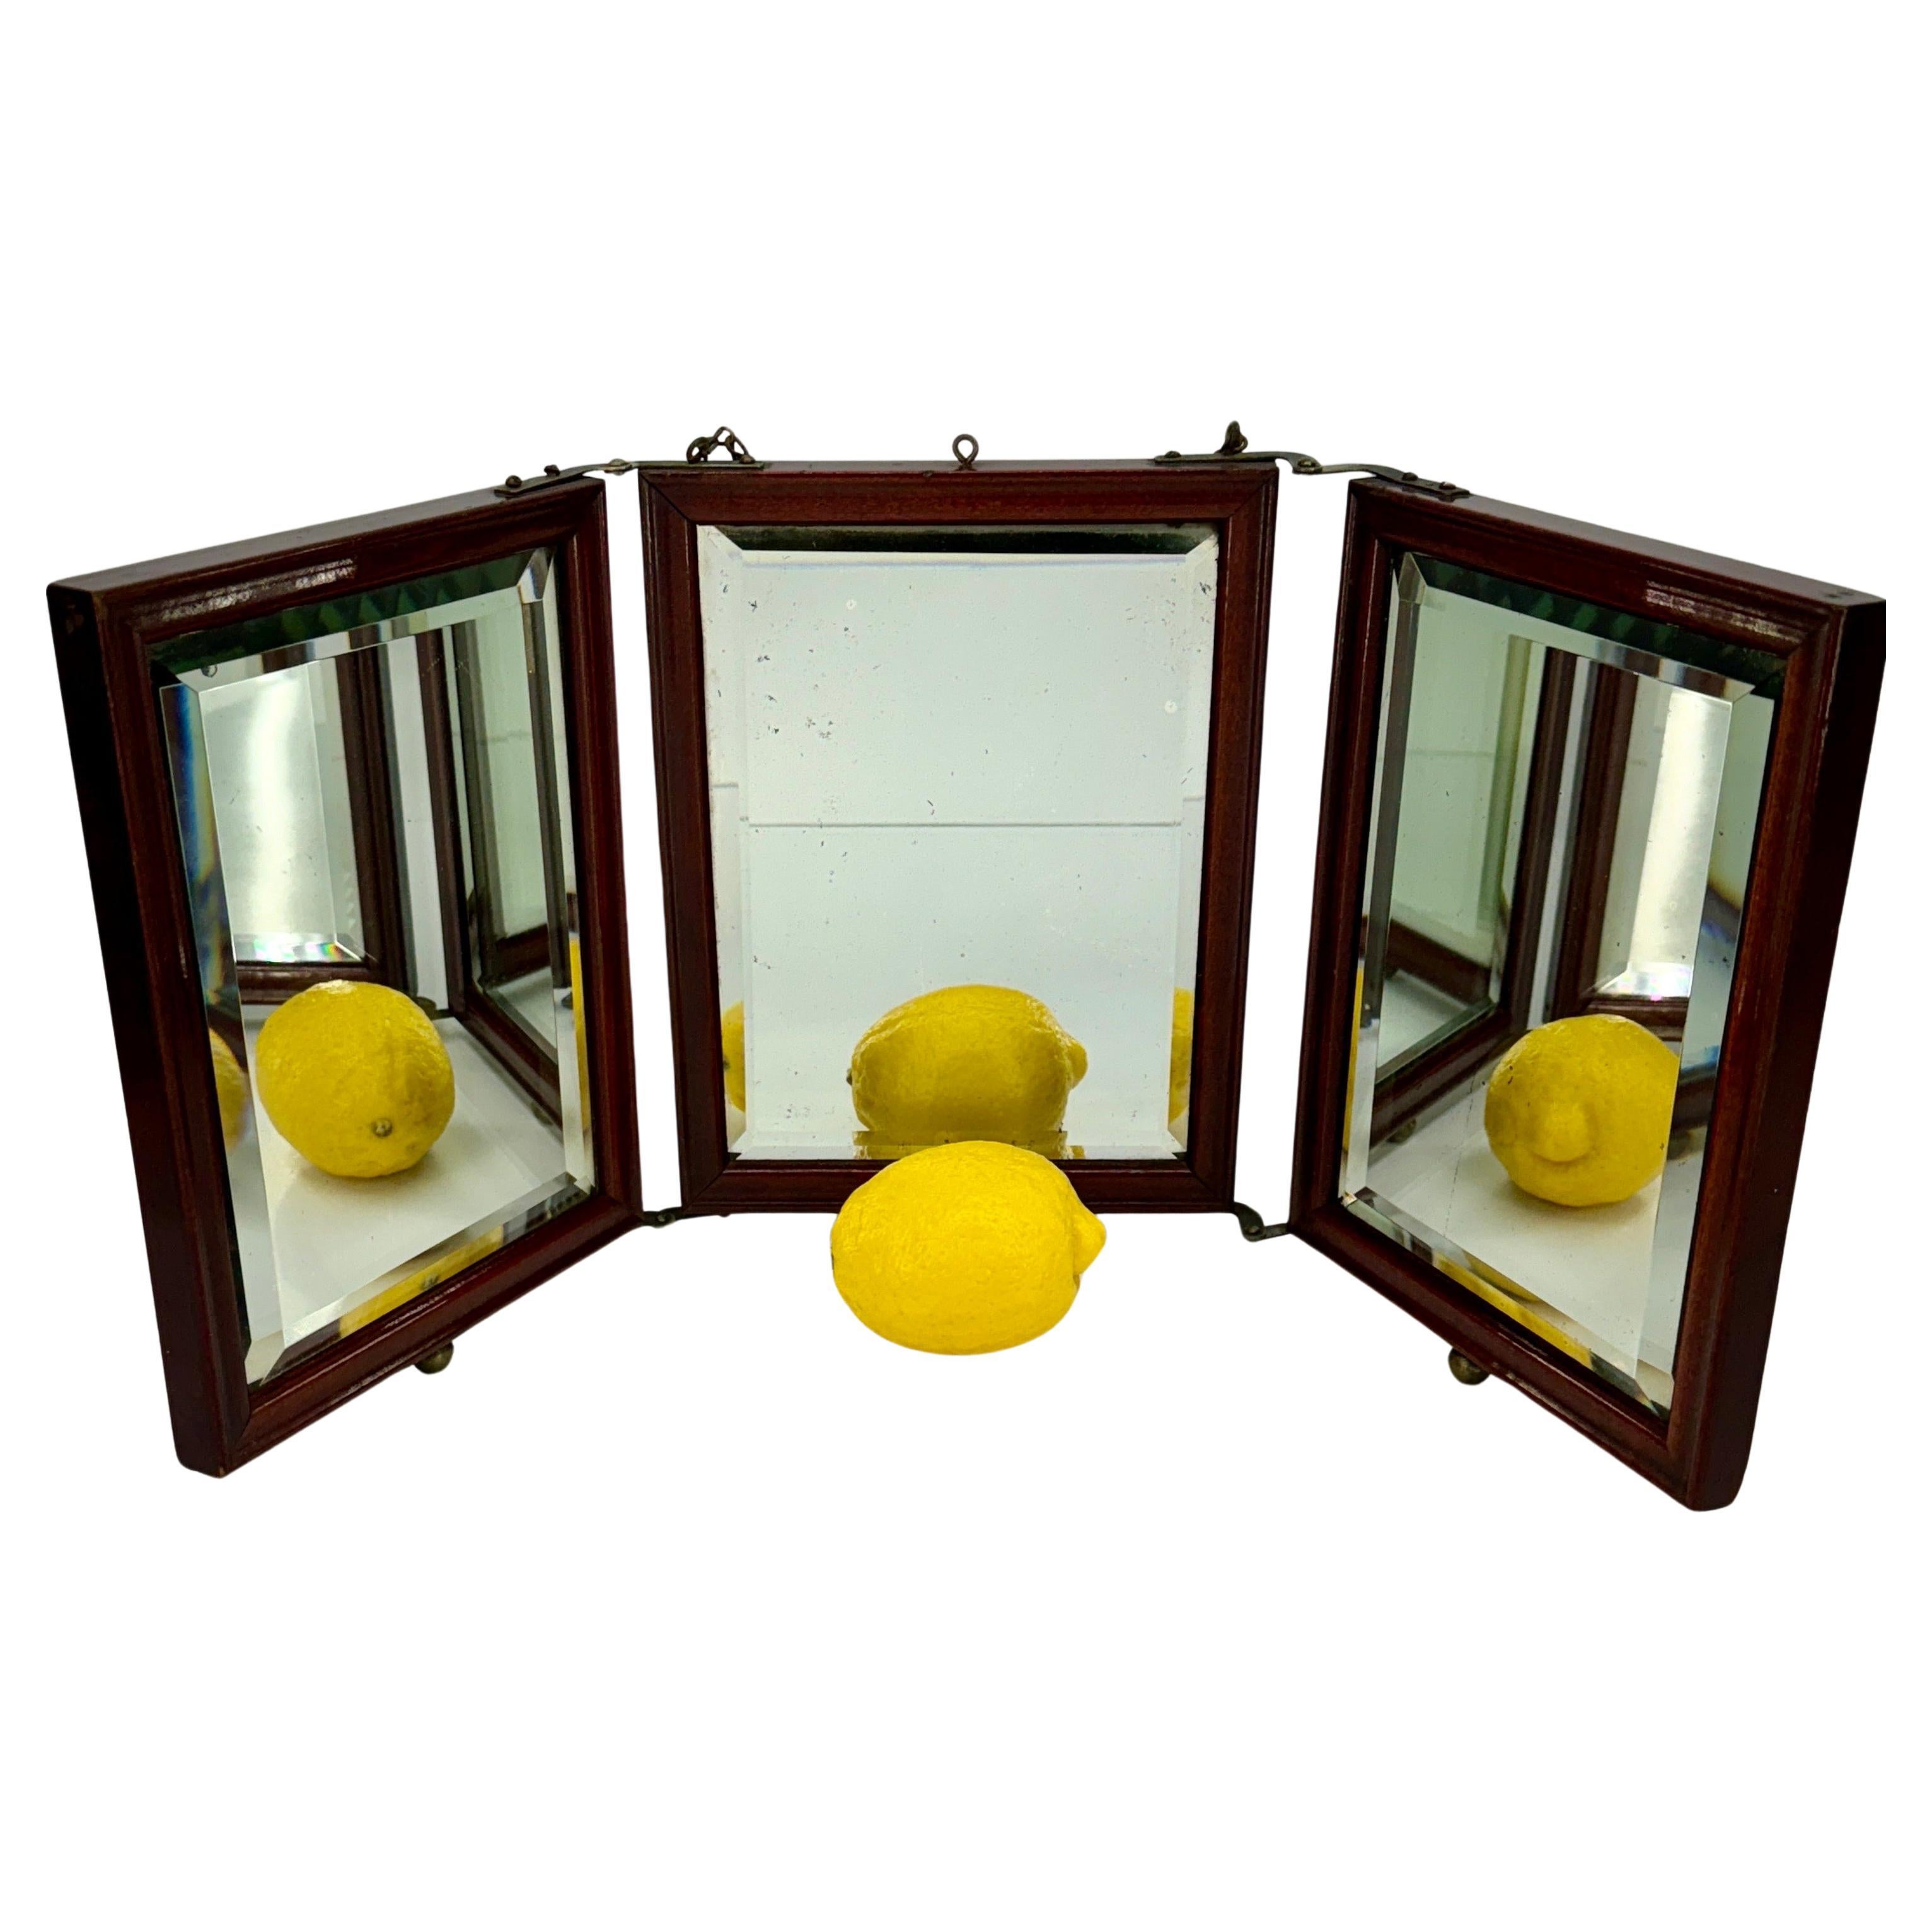 Tri-Fold travel vanity or dresser mirror with beveled glass. 
The mirror can be free standing or hung on the wall in a way that the two side mirror panels remains movable. 